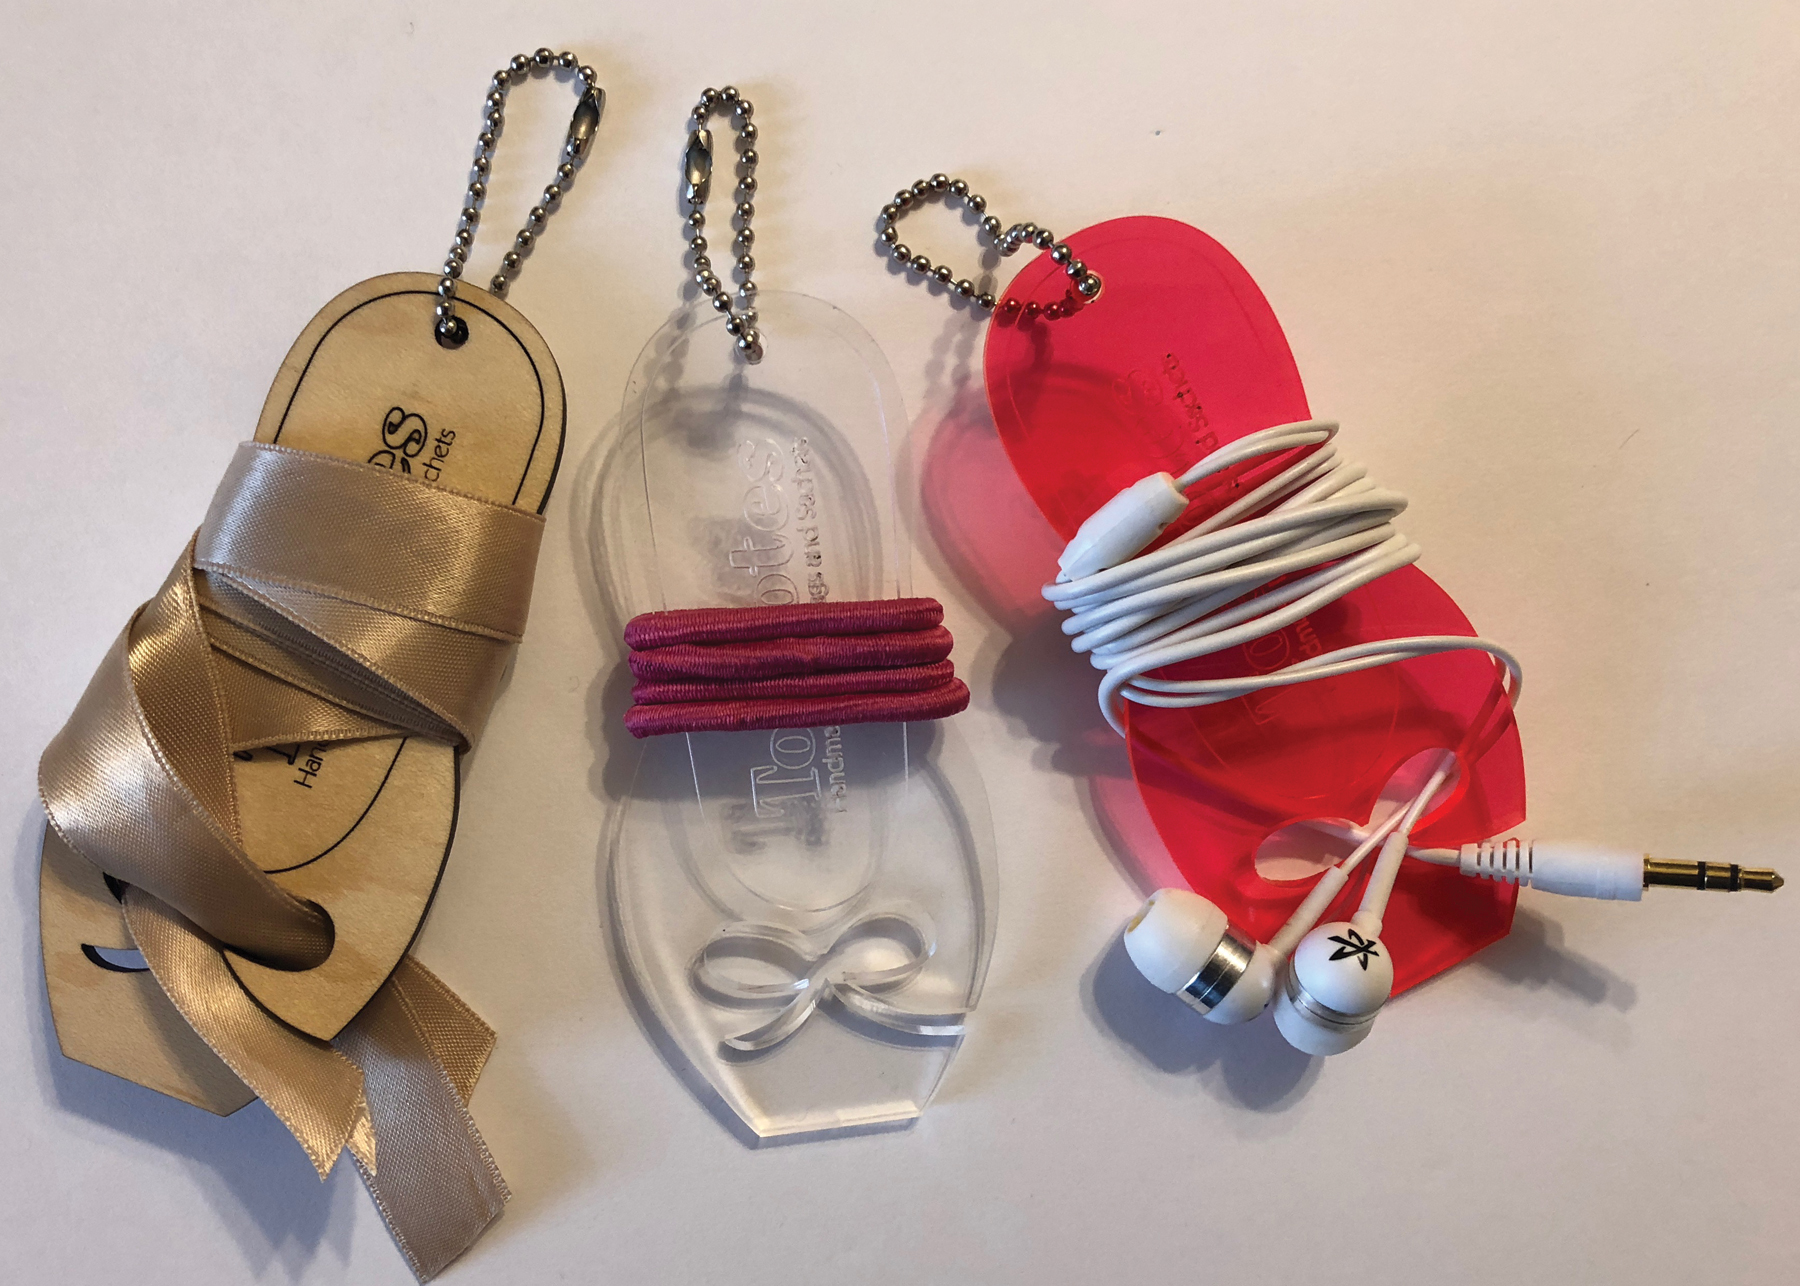 Three keychains demonstrating each of the designed functions